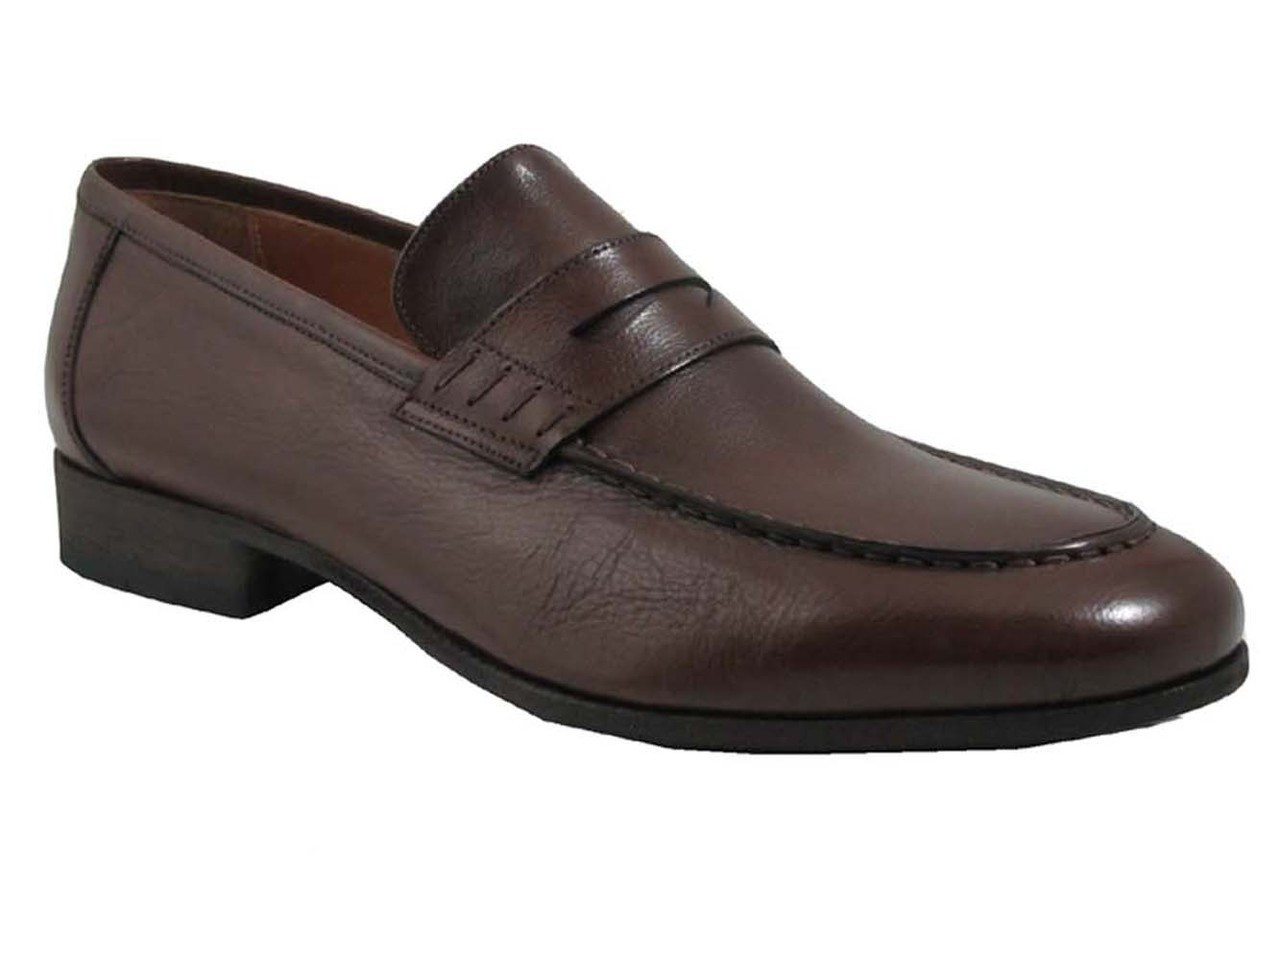 Rossi Men's Italian Leather 1876 Penny Loafers Shoes